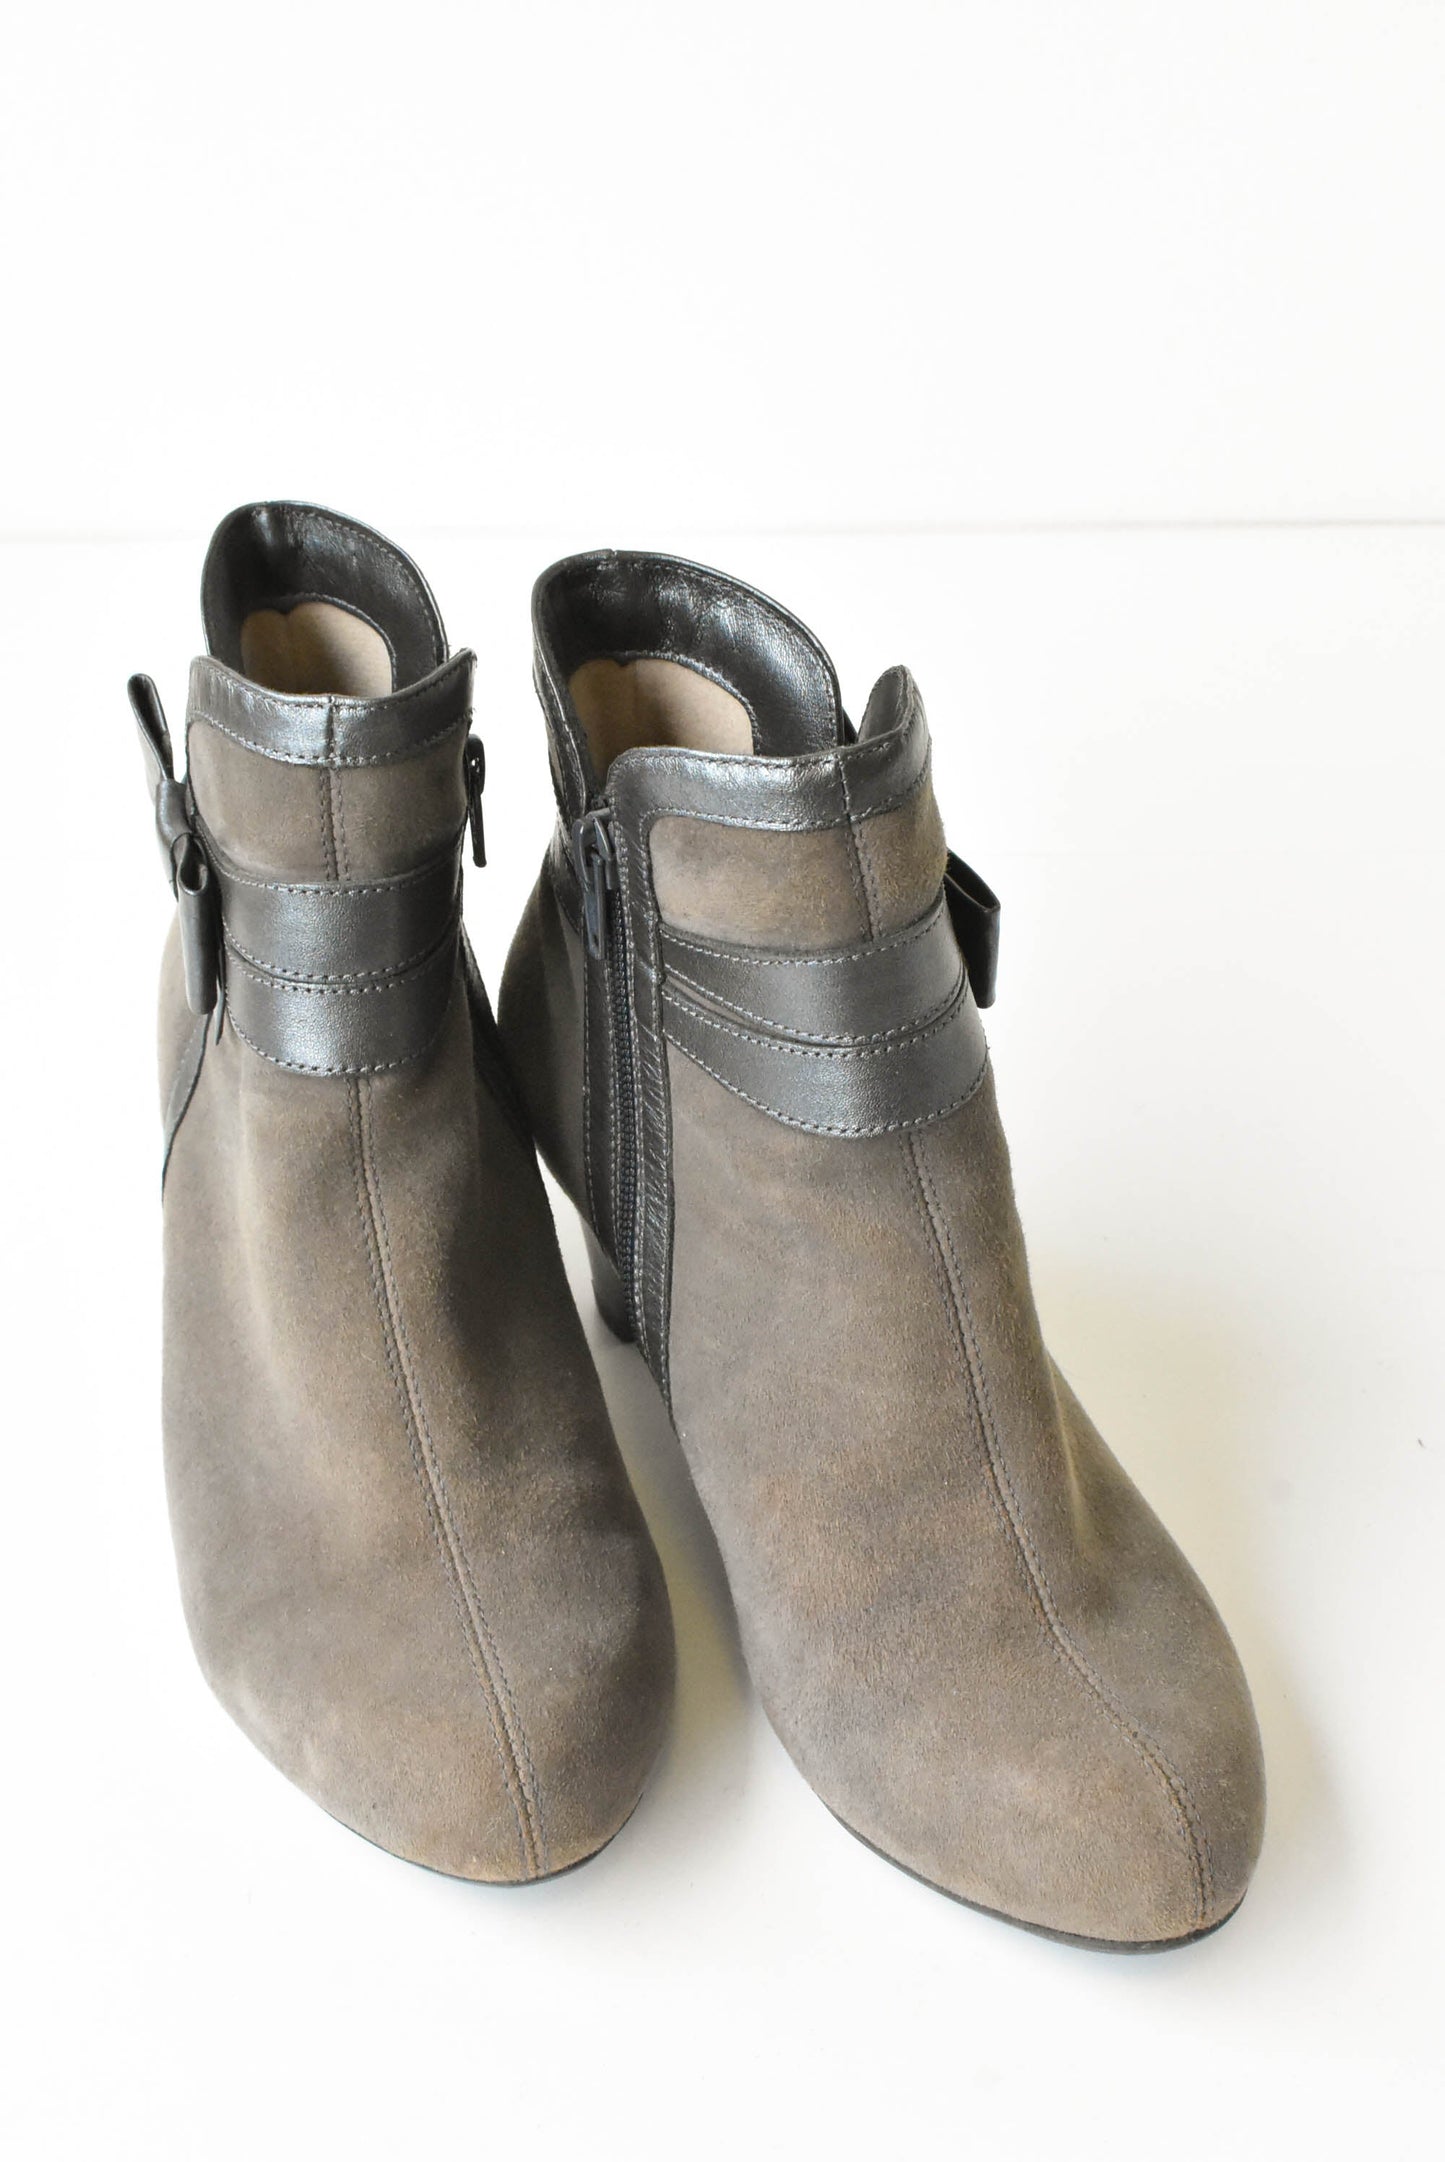 Kumfs Suede ankle boots Size 37